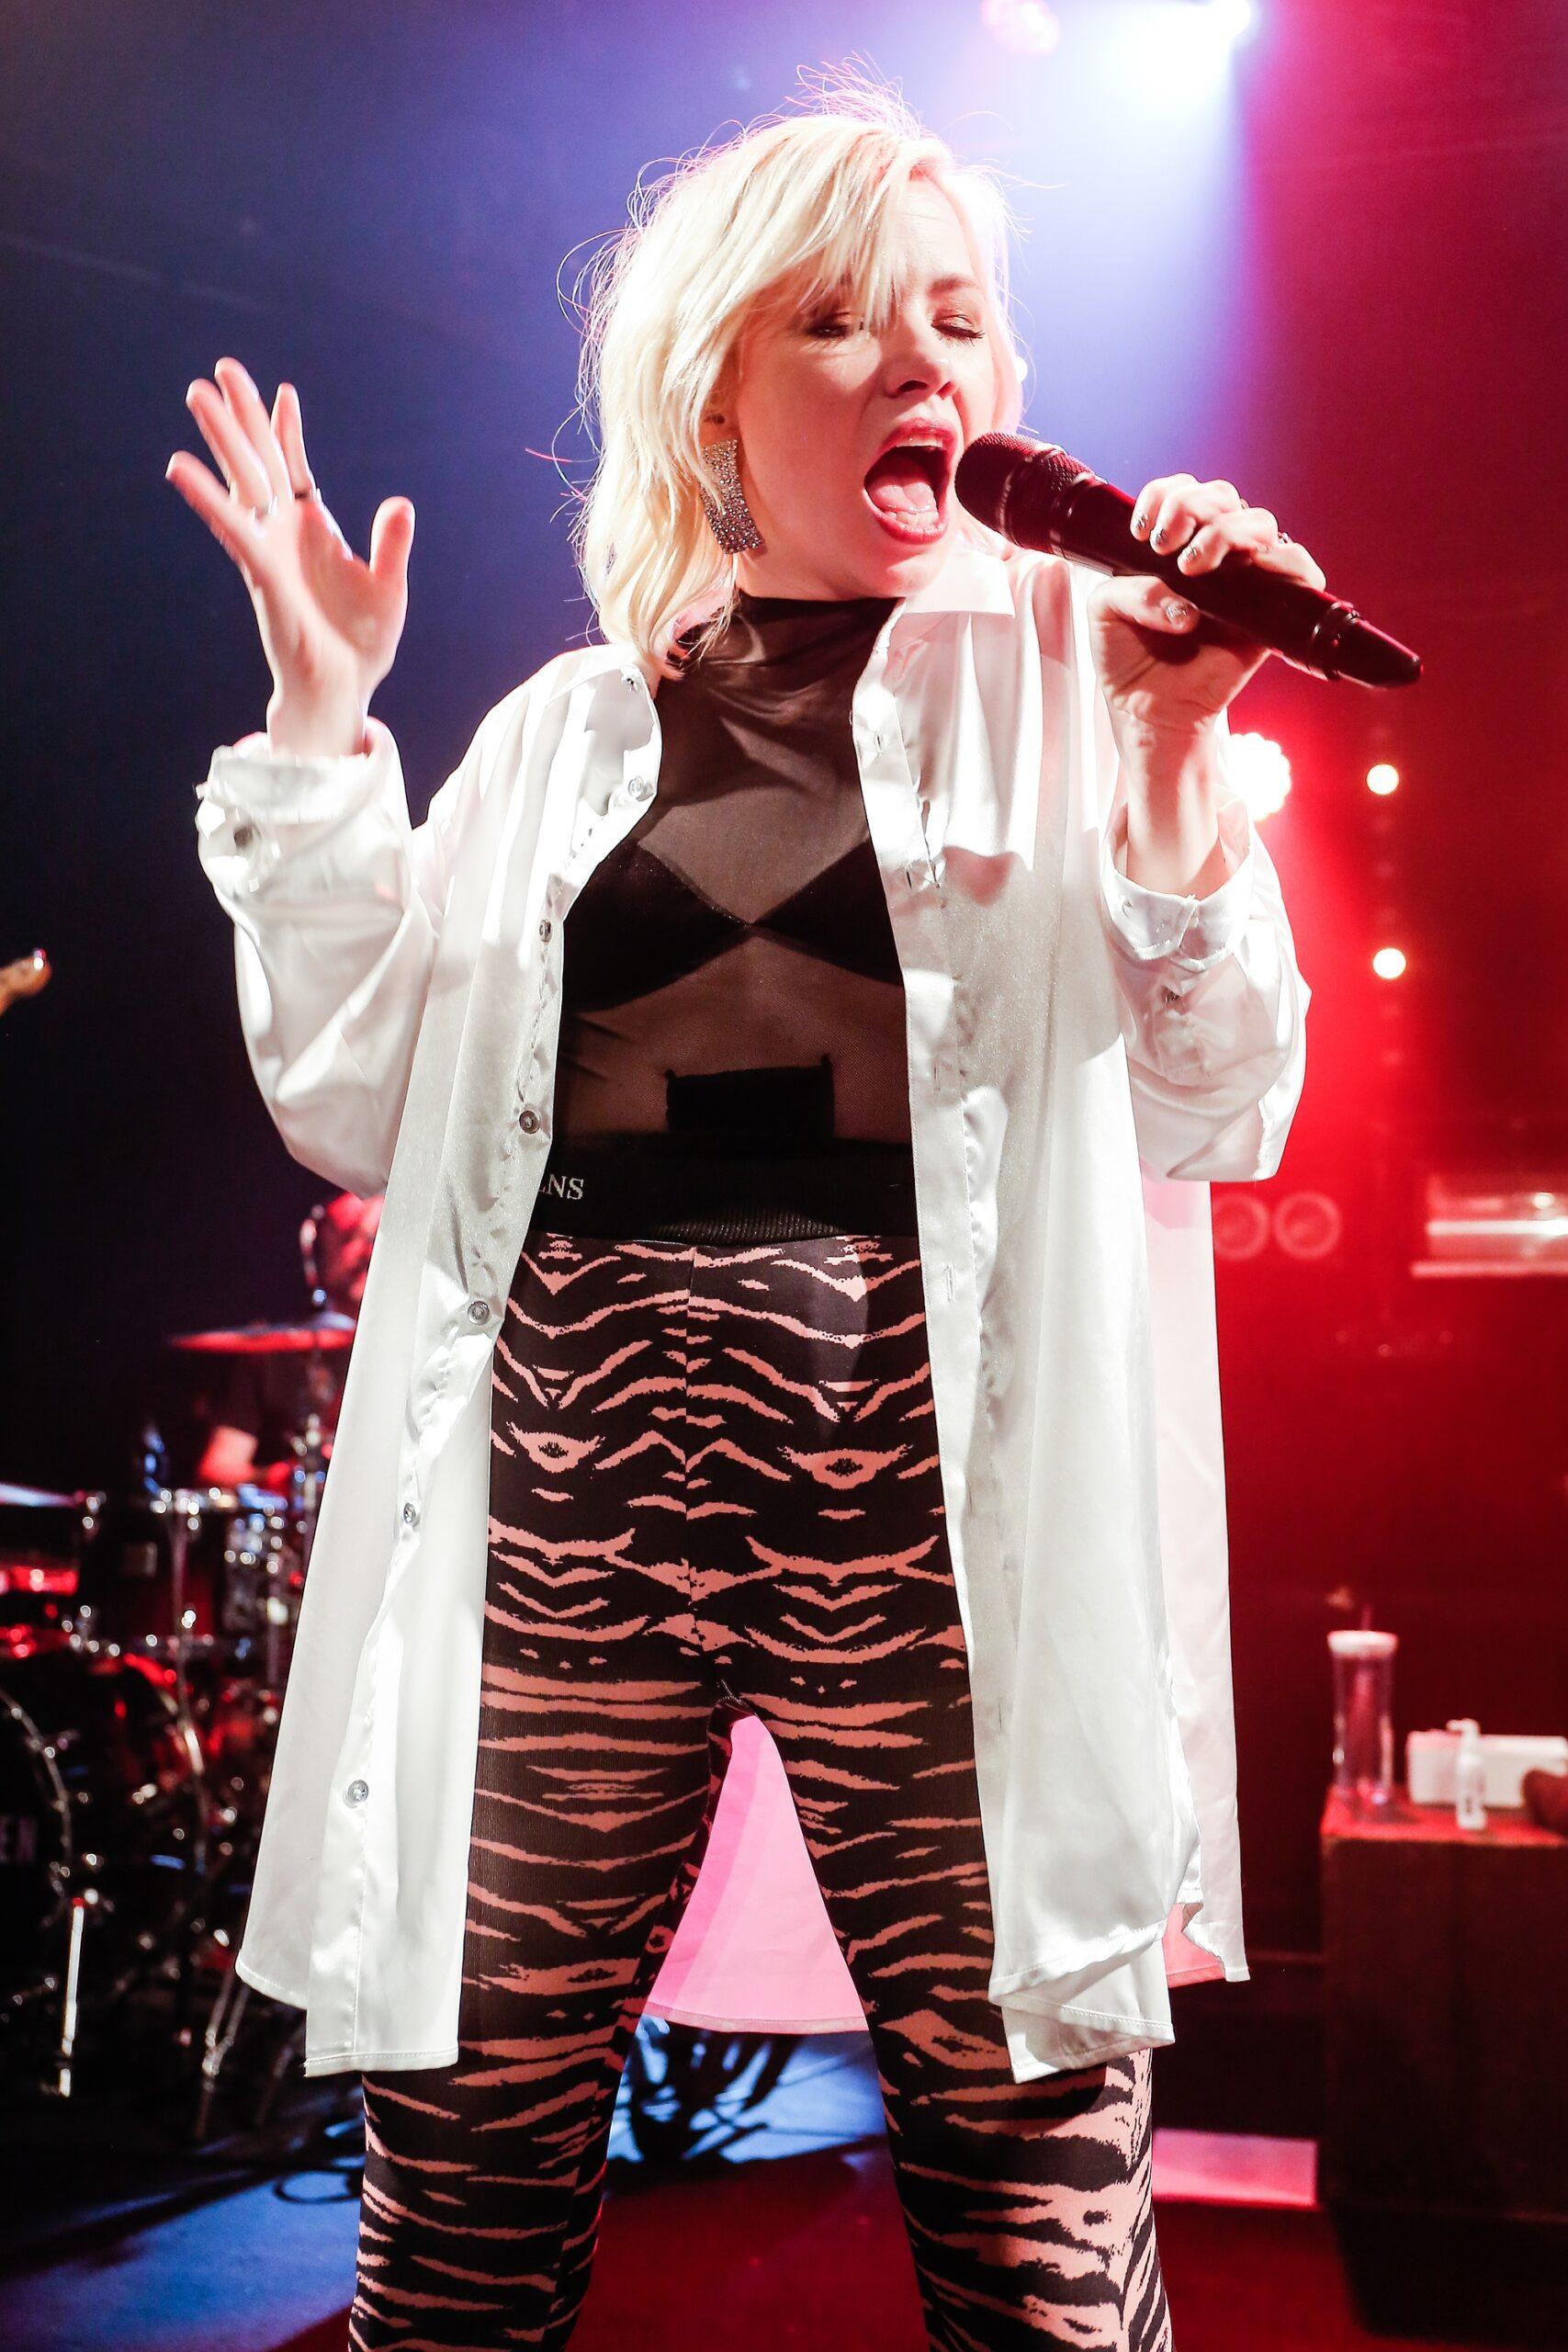 Carly Rae Jepsen performing at the Trabendo in Paris